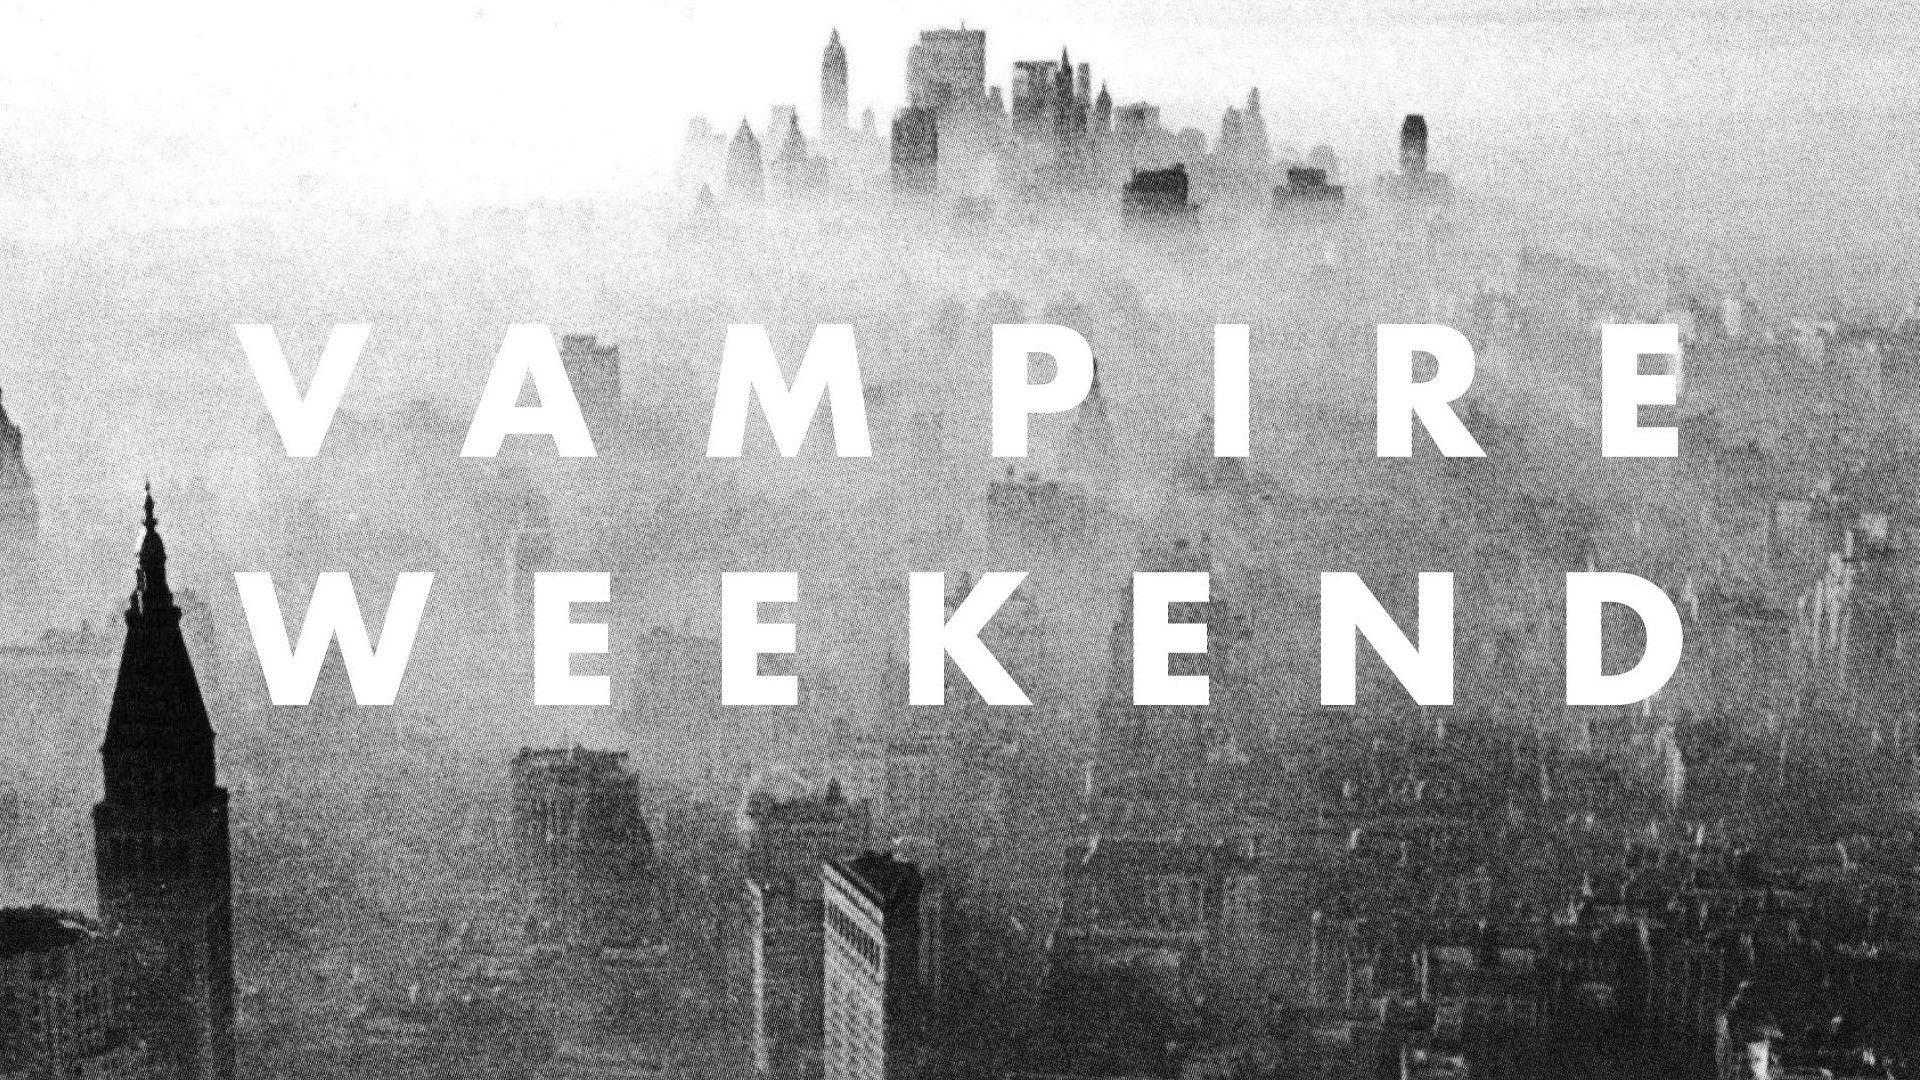 Marvelous Indie Band Vampire Weekend Cover Wallpaper 1920x1080PX